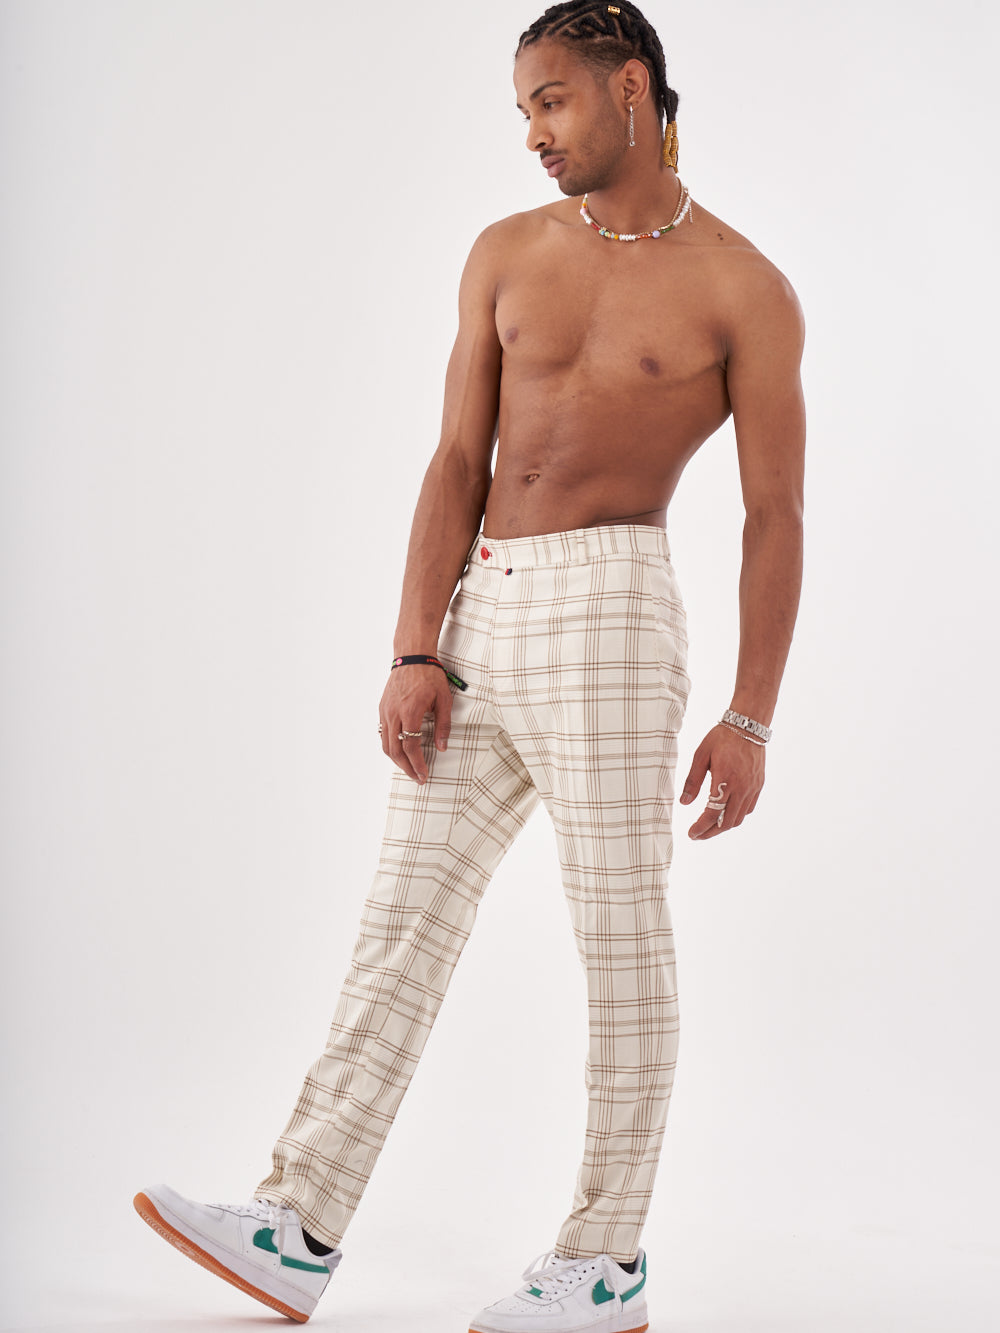 A man in FULLMOON PANTS posing in front of a white background.